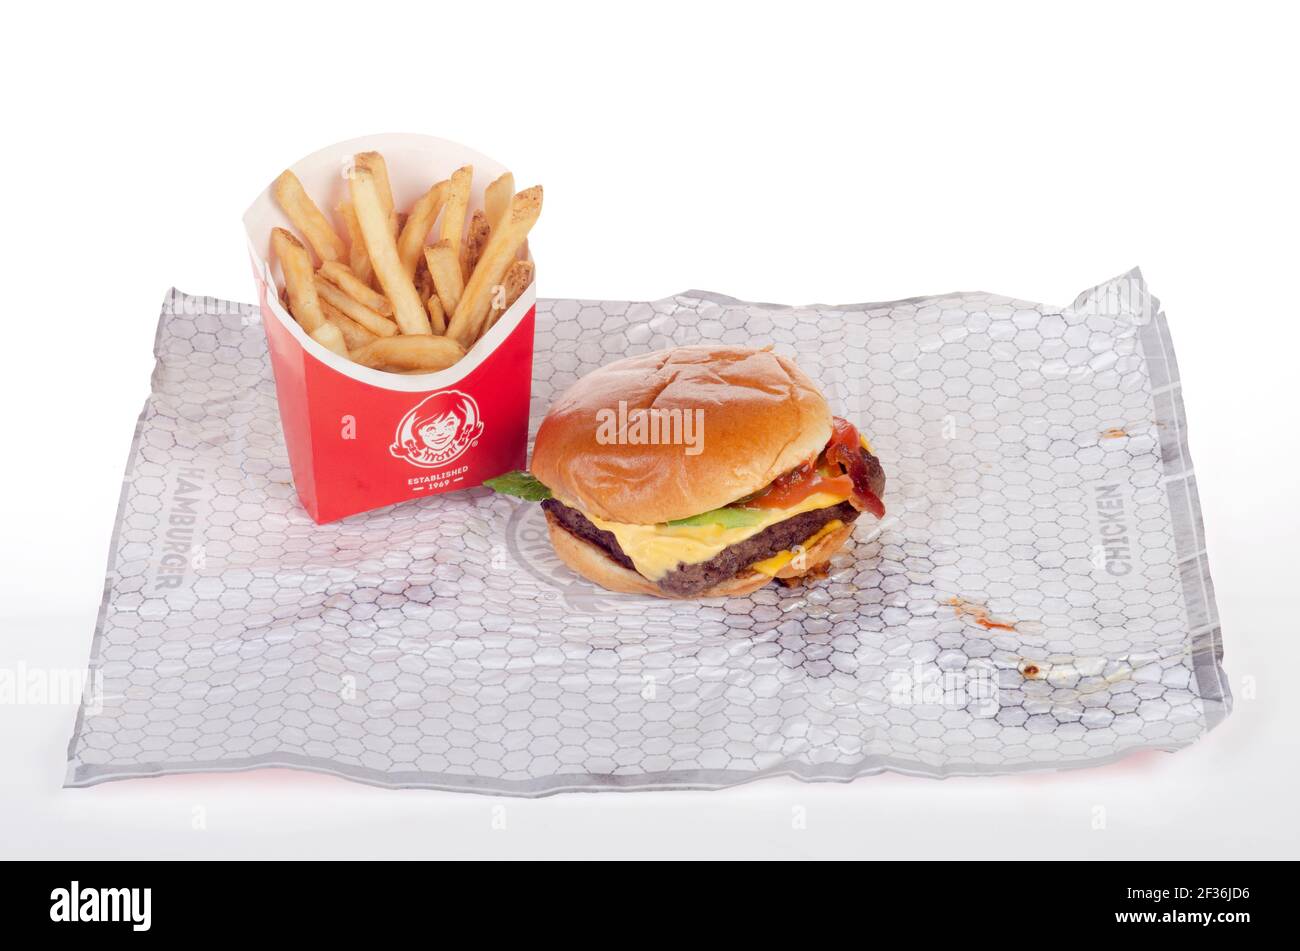 Wendy's Dave's Single Classic Cheeseburger mit Pommes aka Chips Auf Wrapper Stockfoto